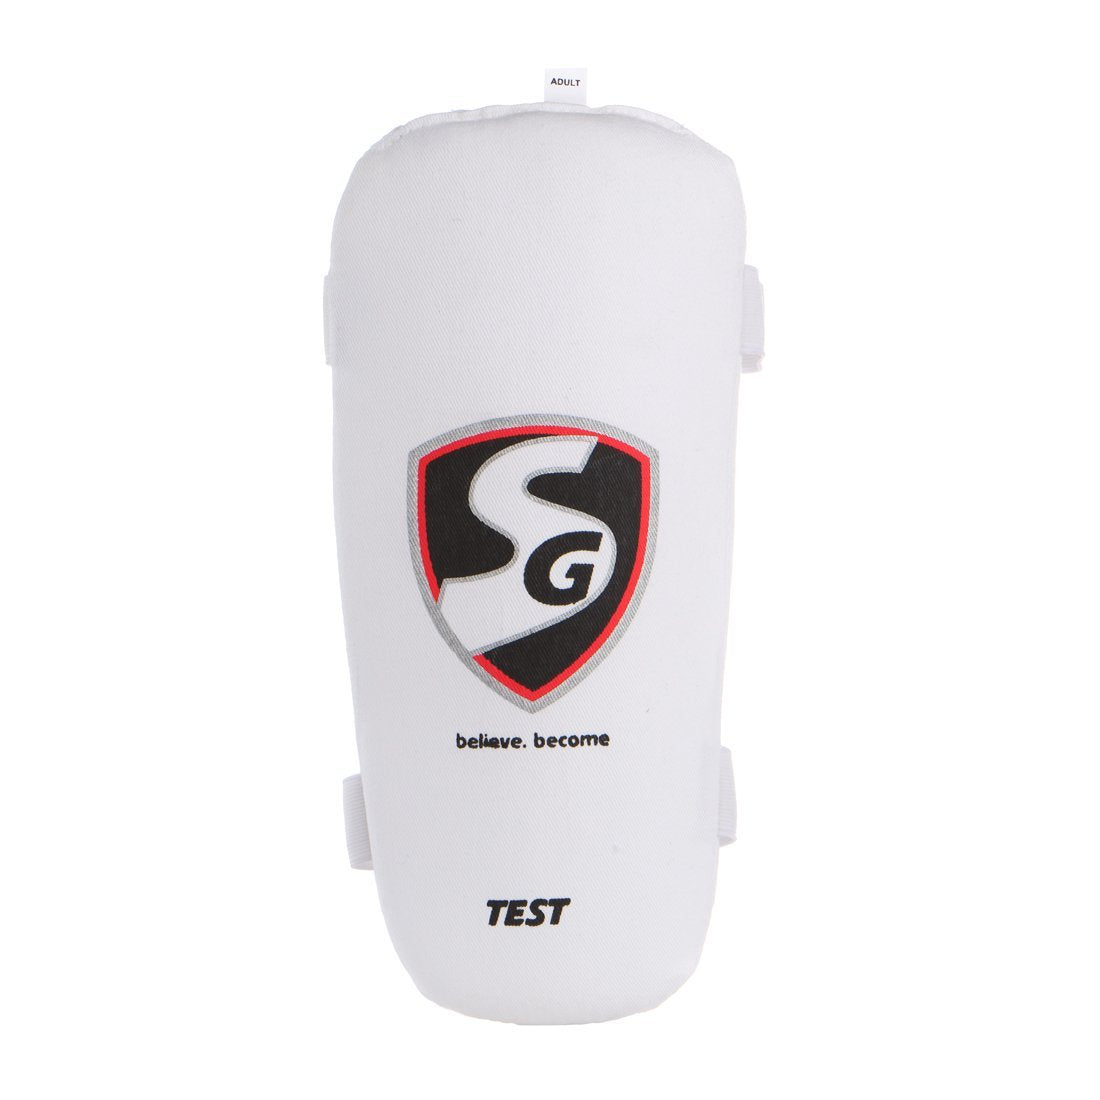 SG Test Cricket Junior / Youth Elbow Guard